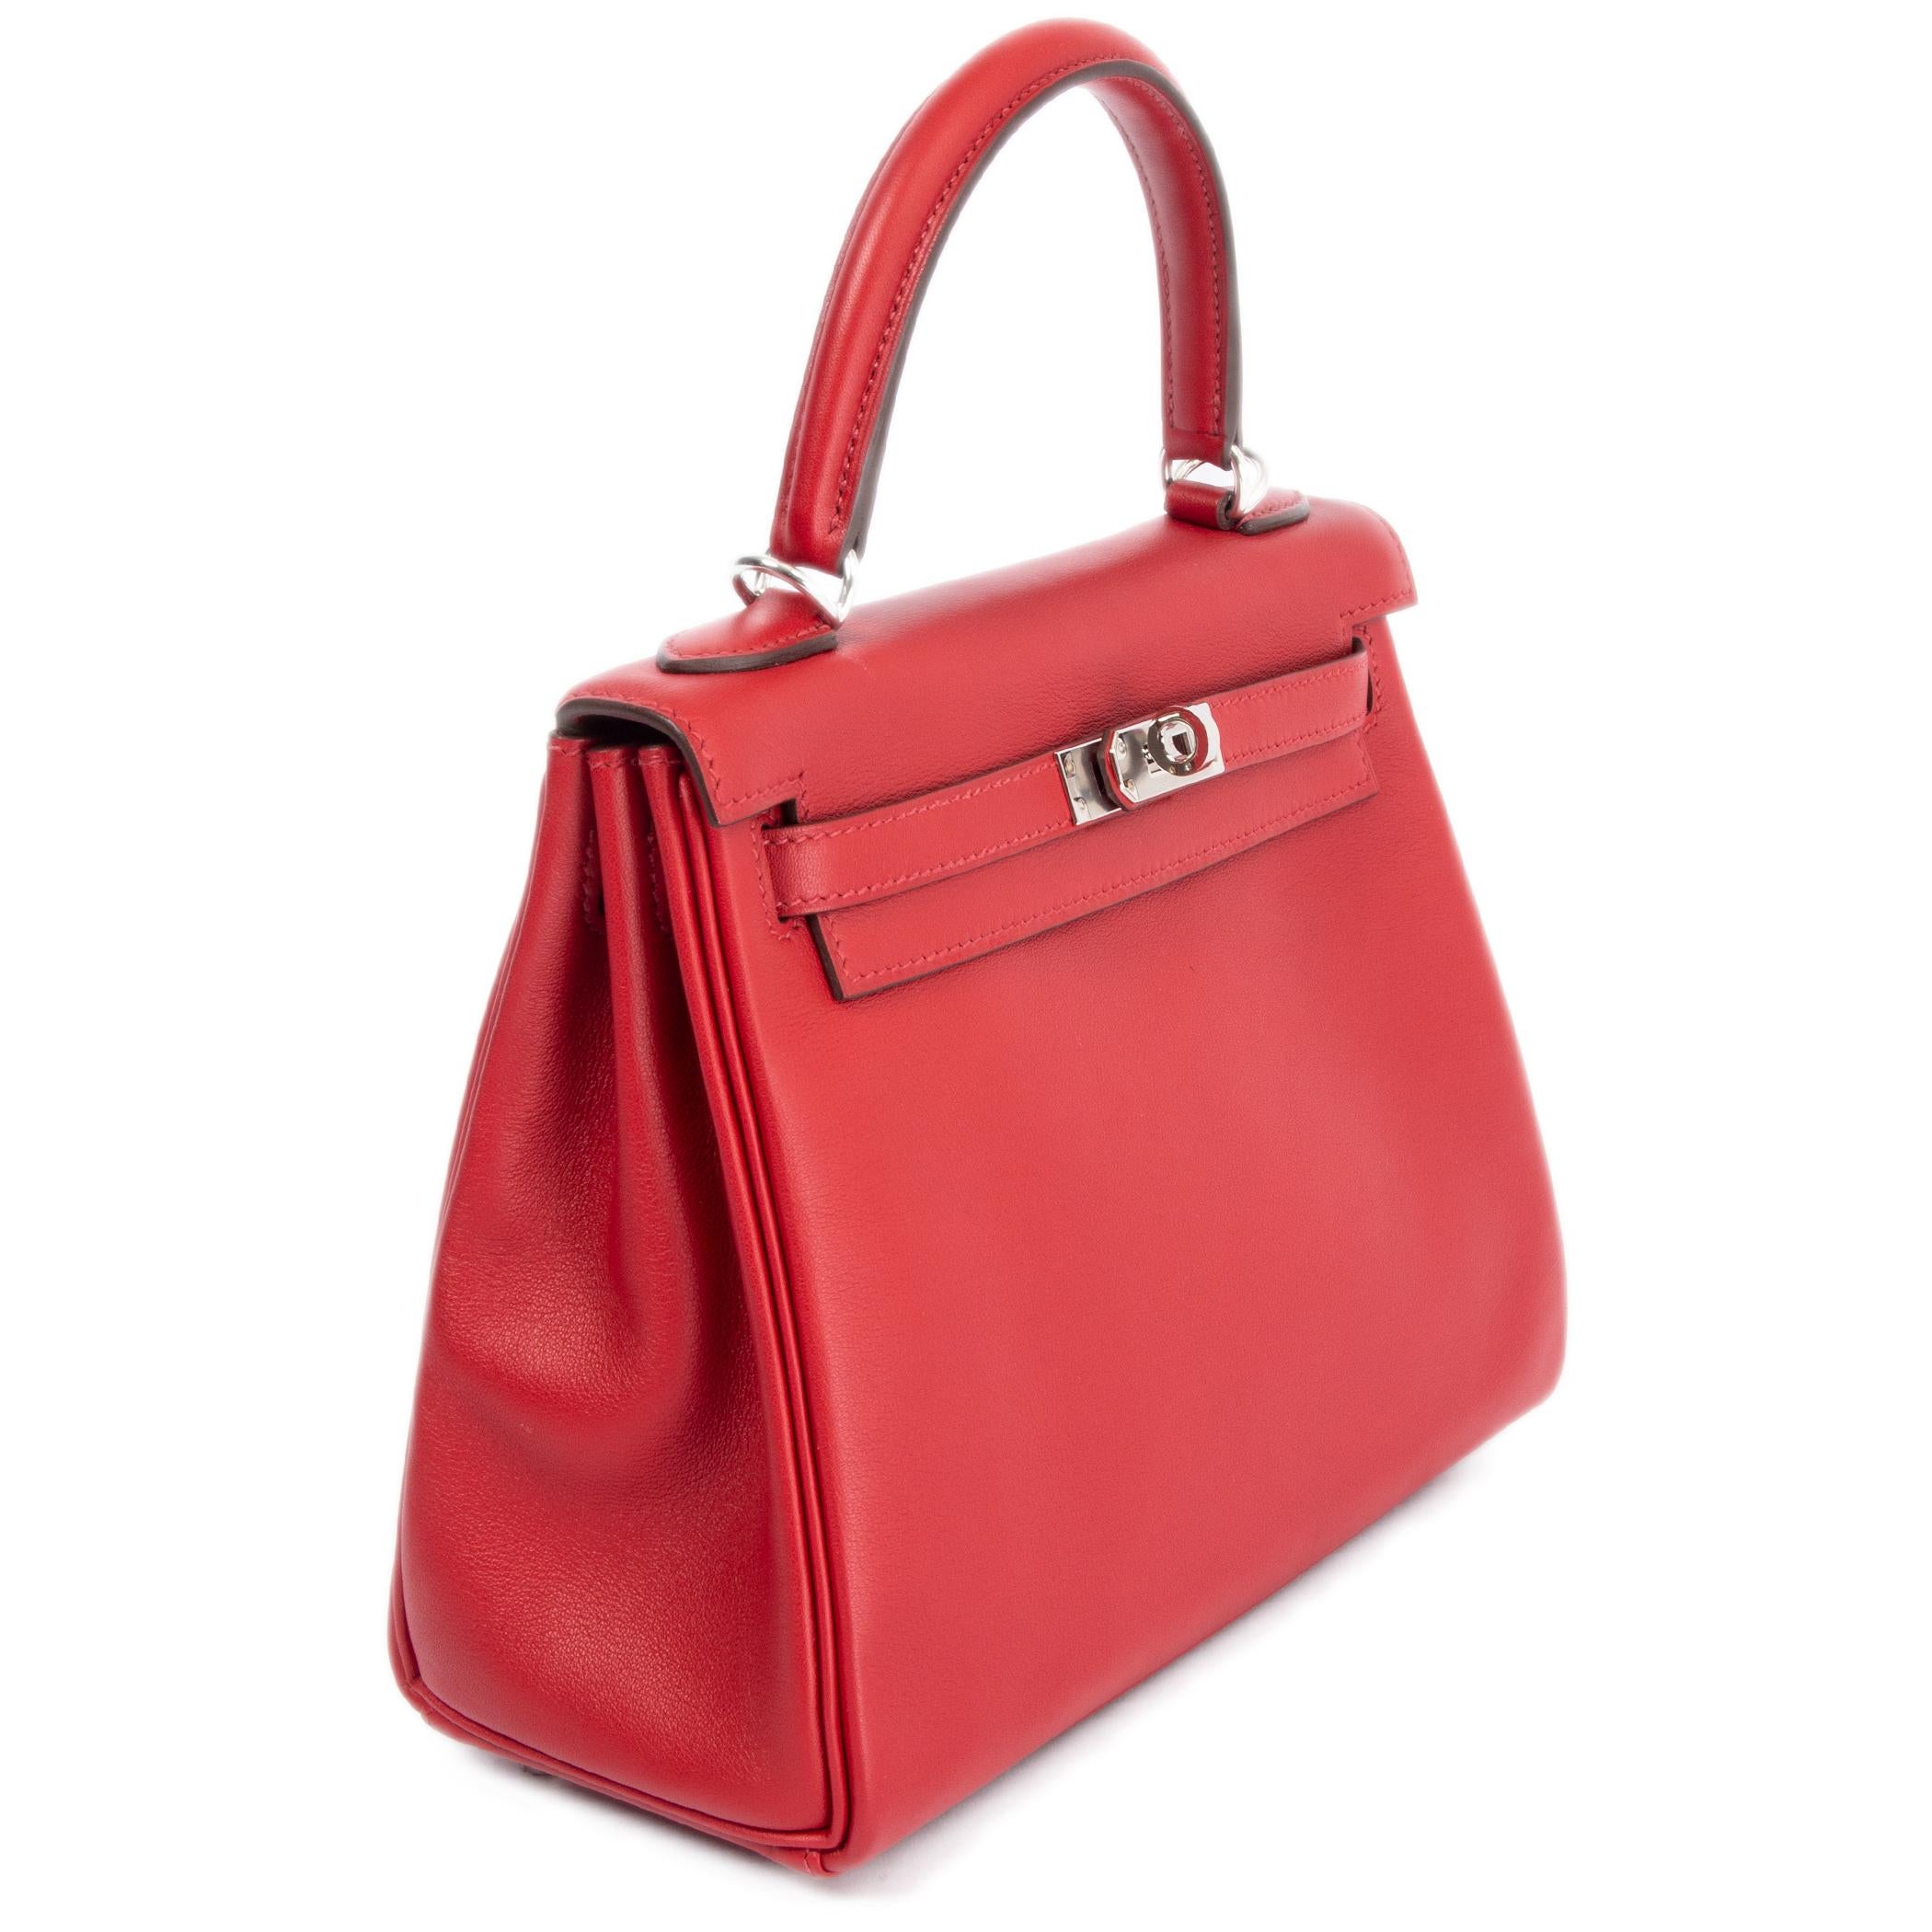 100% authentic Hermes Kelly 25 Retourne bag in Rouge Piment red Veau Swift leather with palladium hardware. Lined in Chevre (goat skin) with an open pocket against the front and a zipper pocket against the back. Brand new - Full